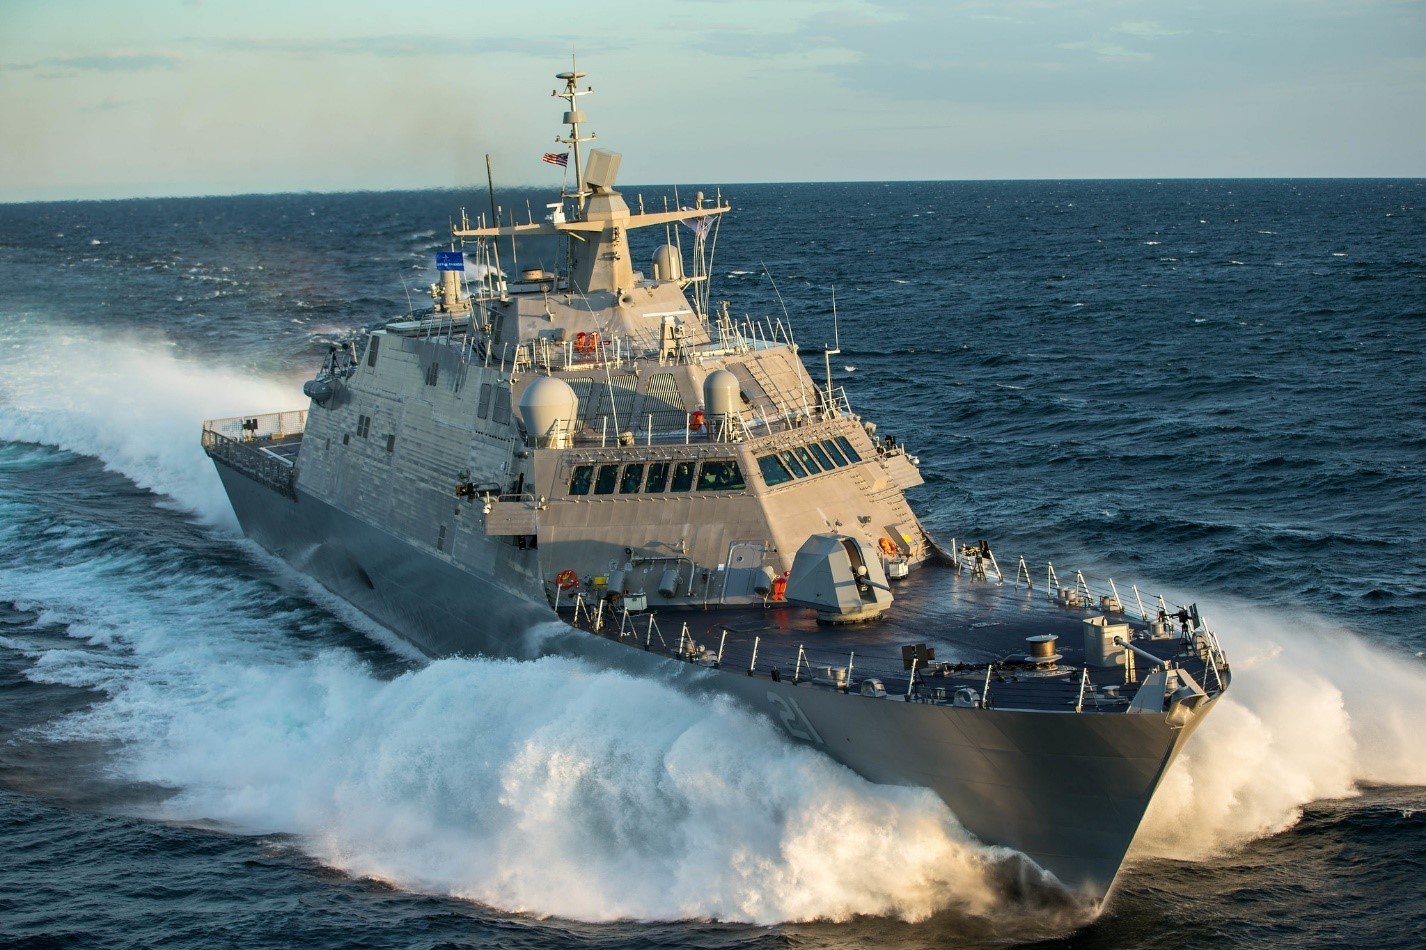 US Navy Accepts Delivery of Future USS Minneapolis-Saint Paul (LCS 21)